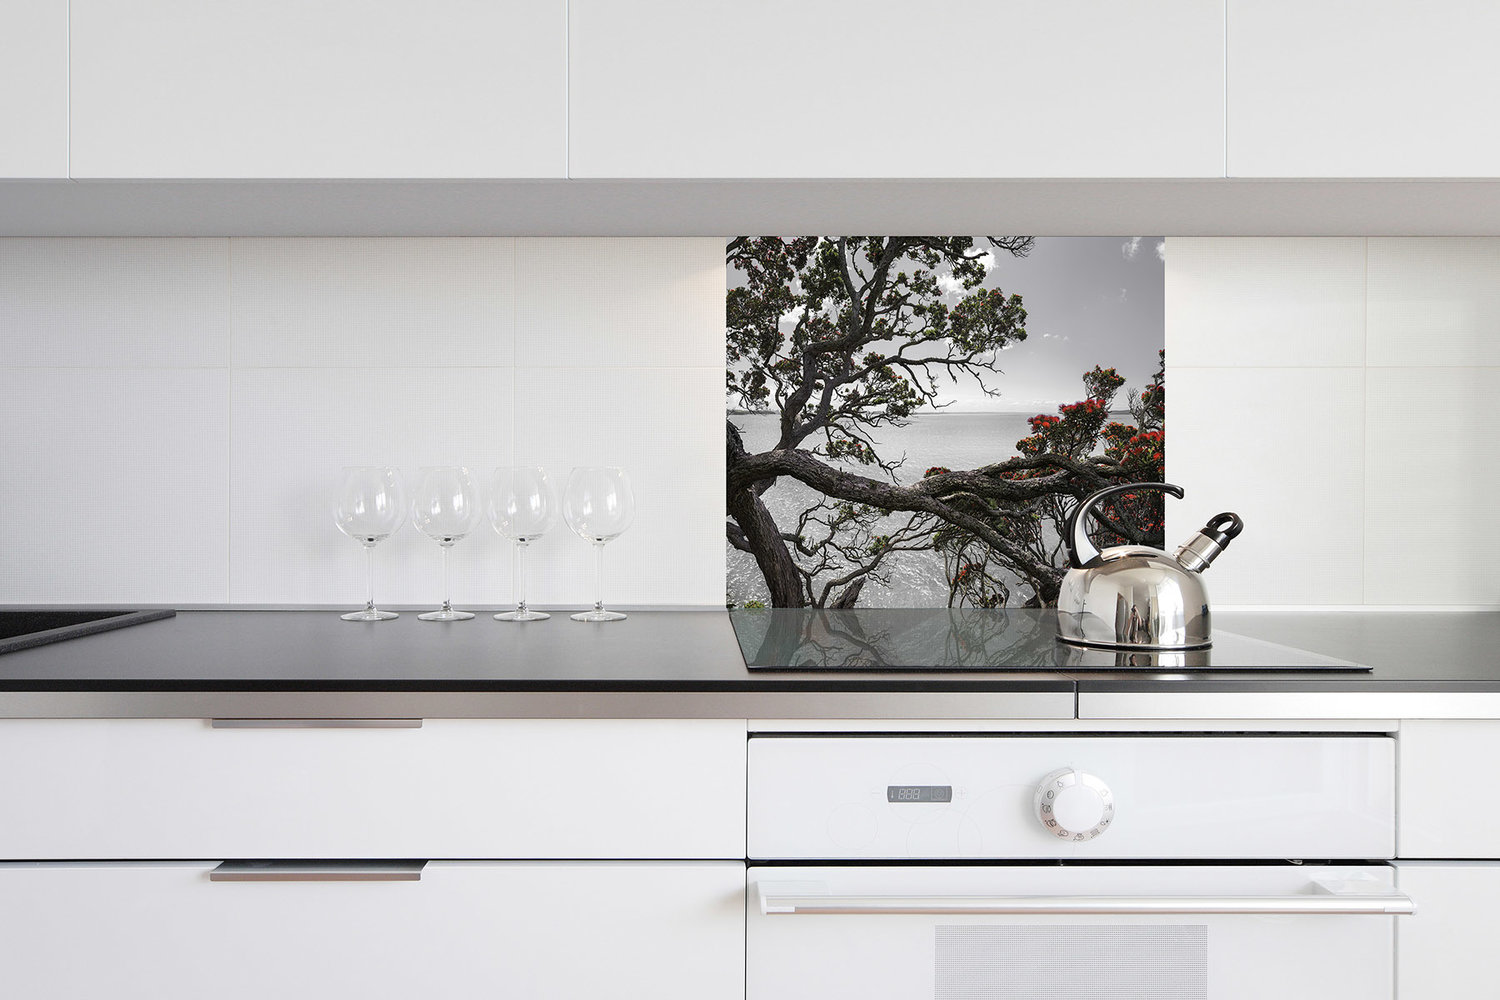 DIY Specials Printed Images On Glass Kitchen Splashbacks And Glass Wall Art By Lucy G